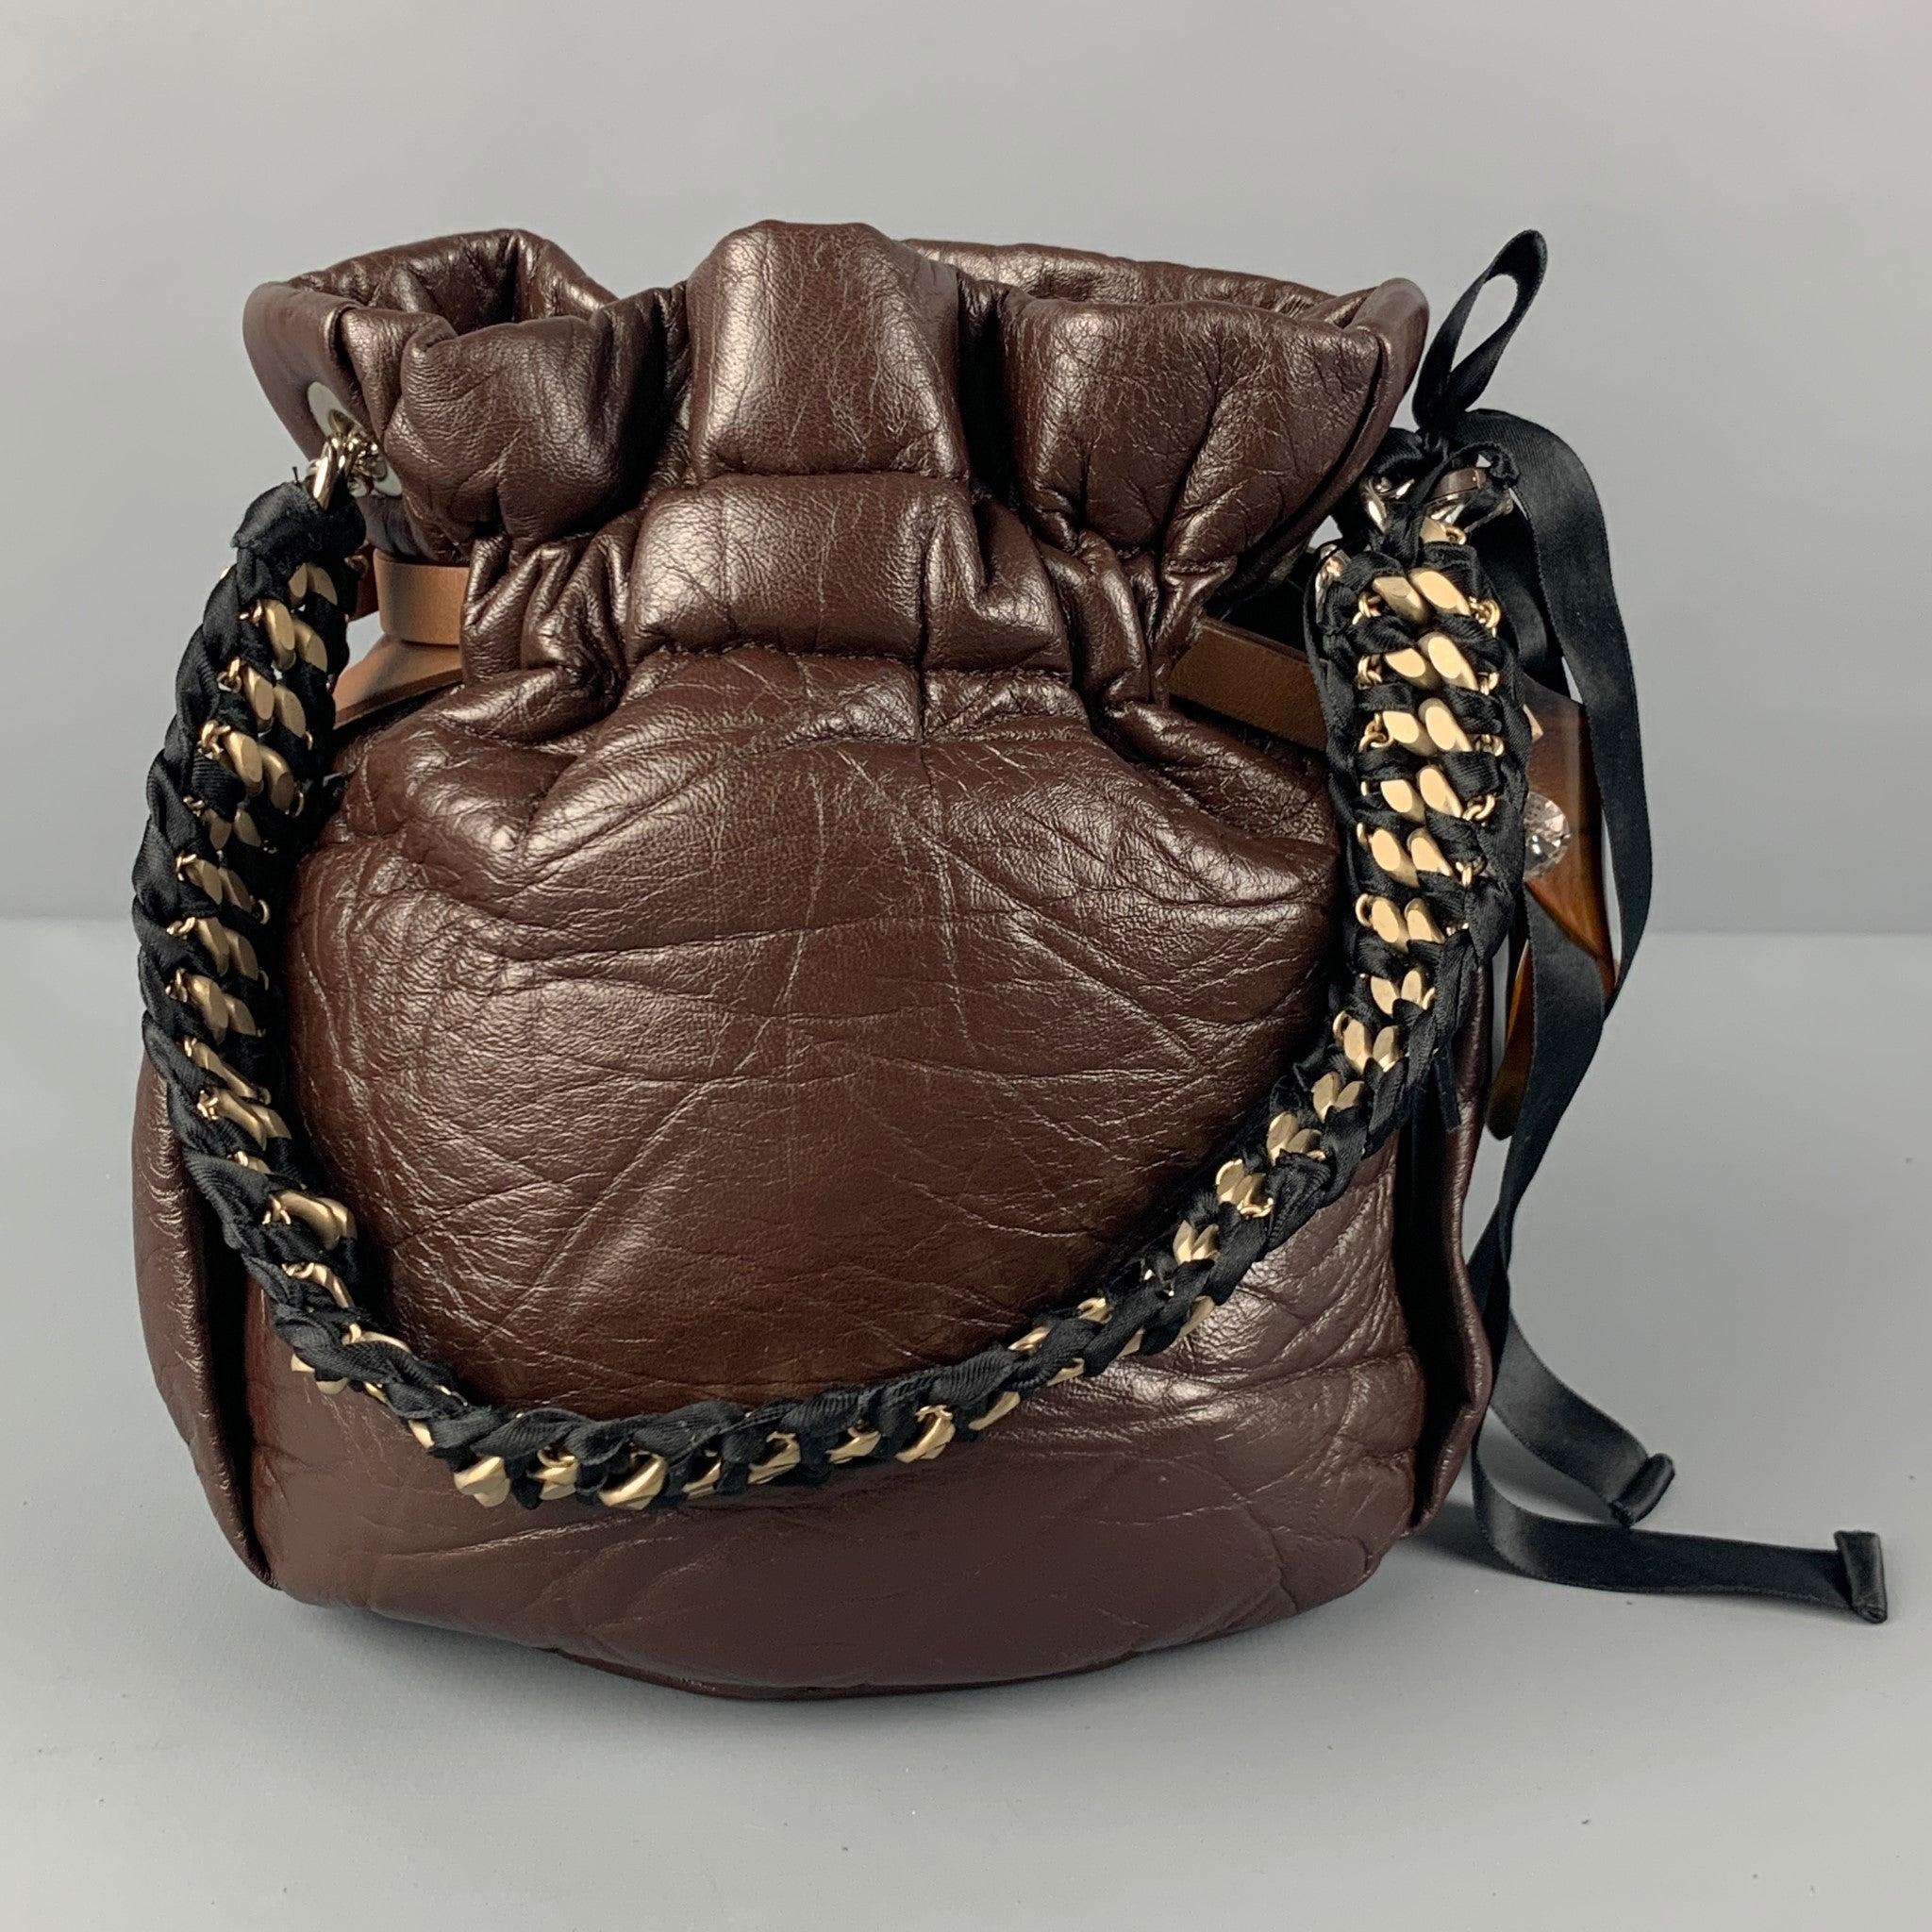 MARNI handbag comes in a brown wrinkle leather featuring a charm detail, woven handle, and a adjustable strap closure. Comes with dust bag. Made in Italy.Very Good
Pre-Owned Condition. 

Measurements: 
  Length: 7.5 inches  Width: 3 inches  Height: